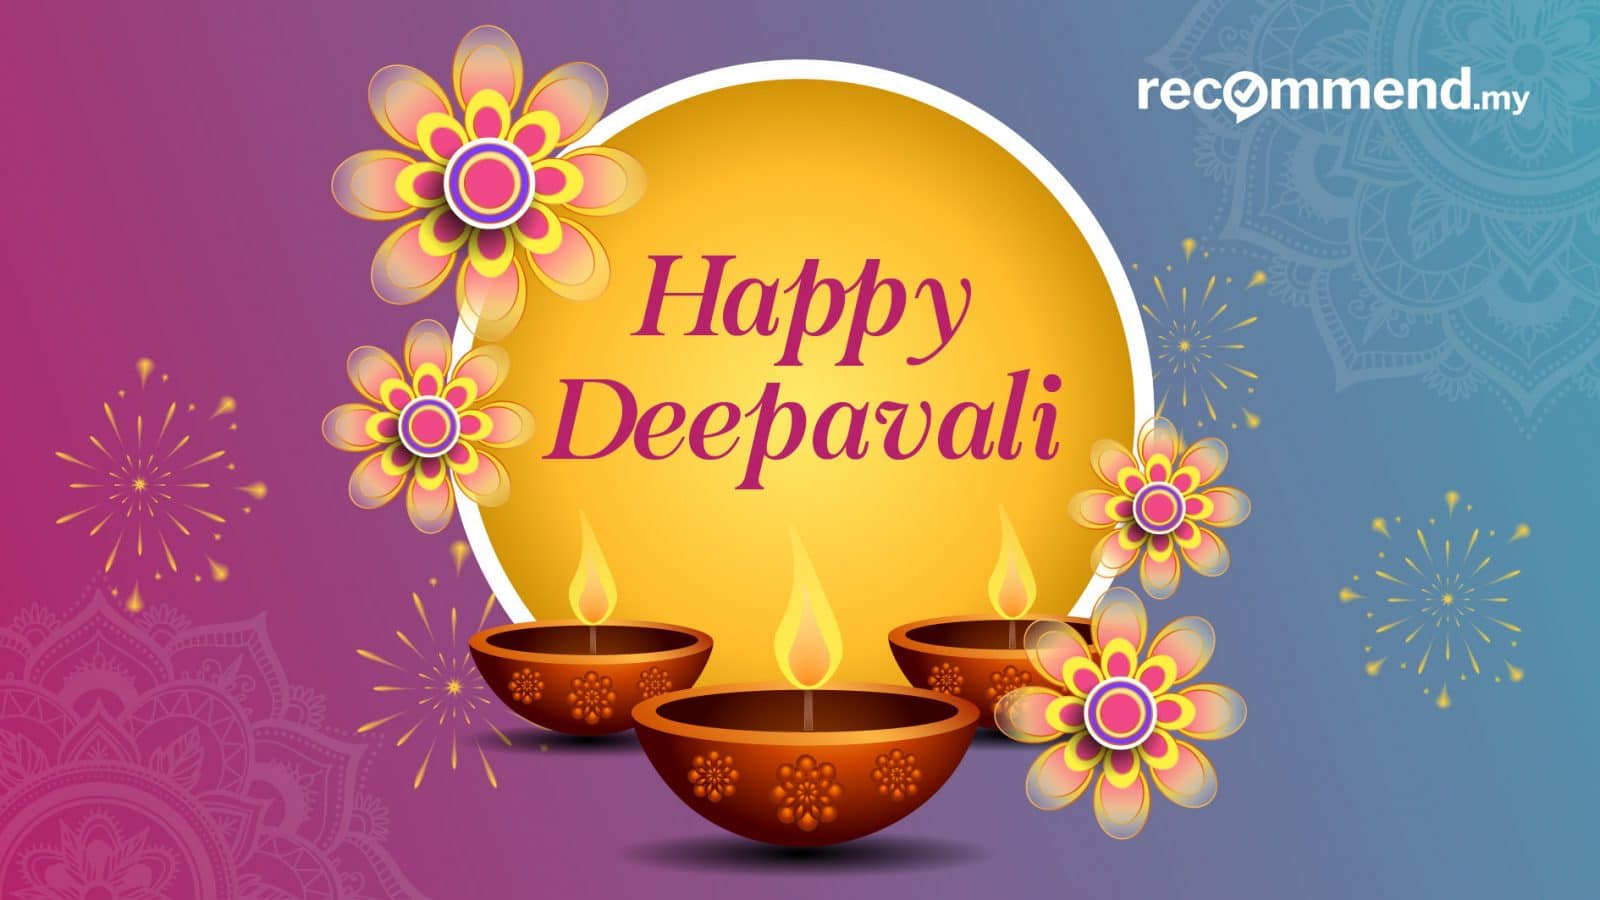 Tips for Celebrating Deepavali in COVID times - Recommend.my